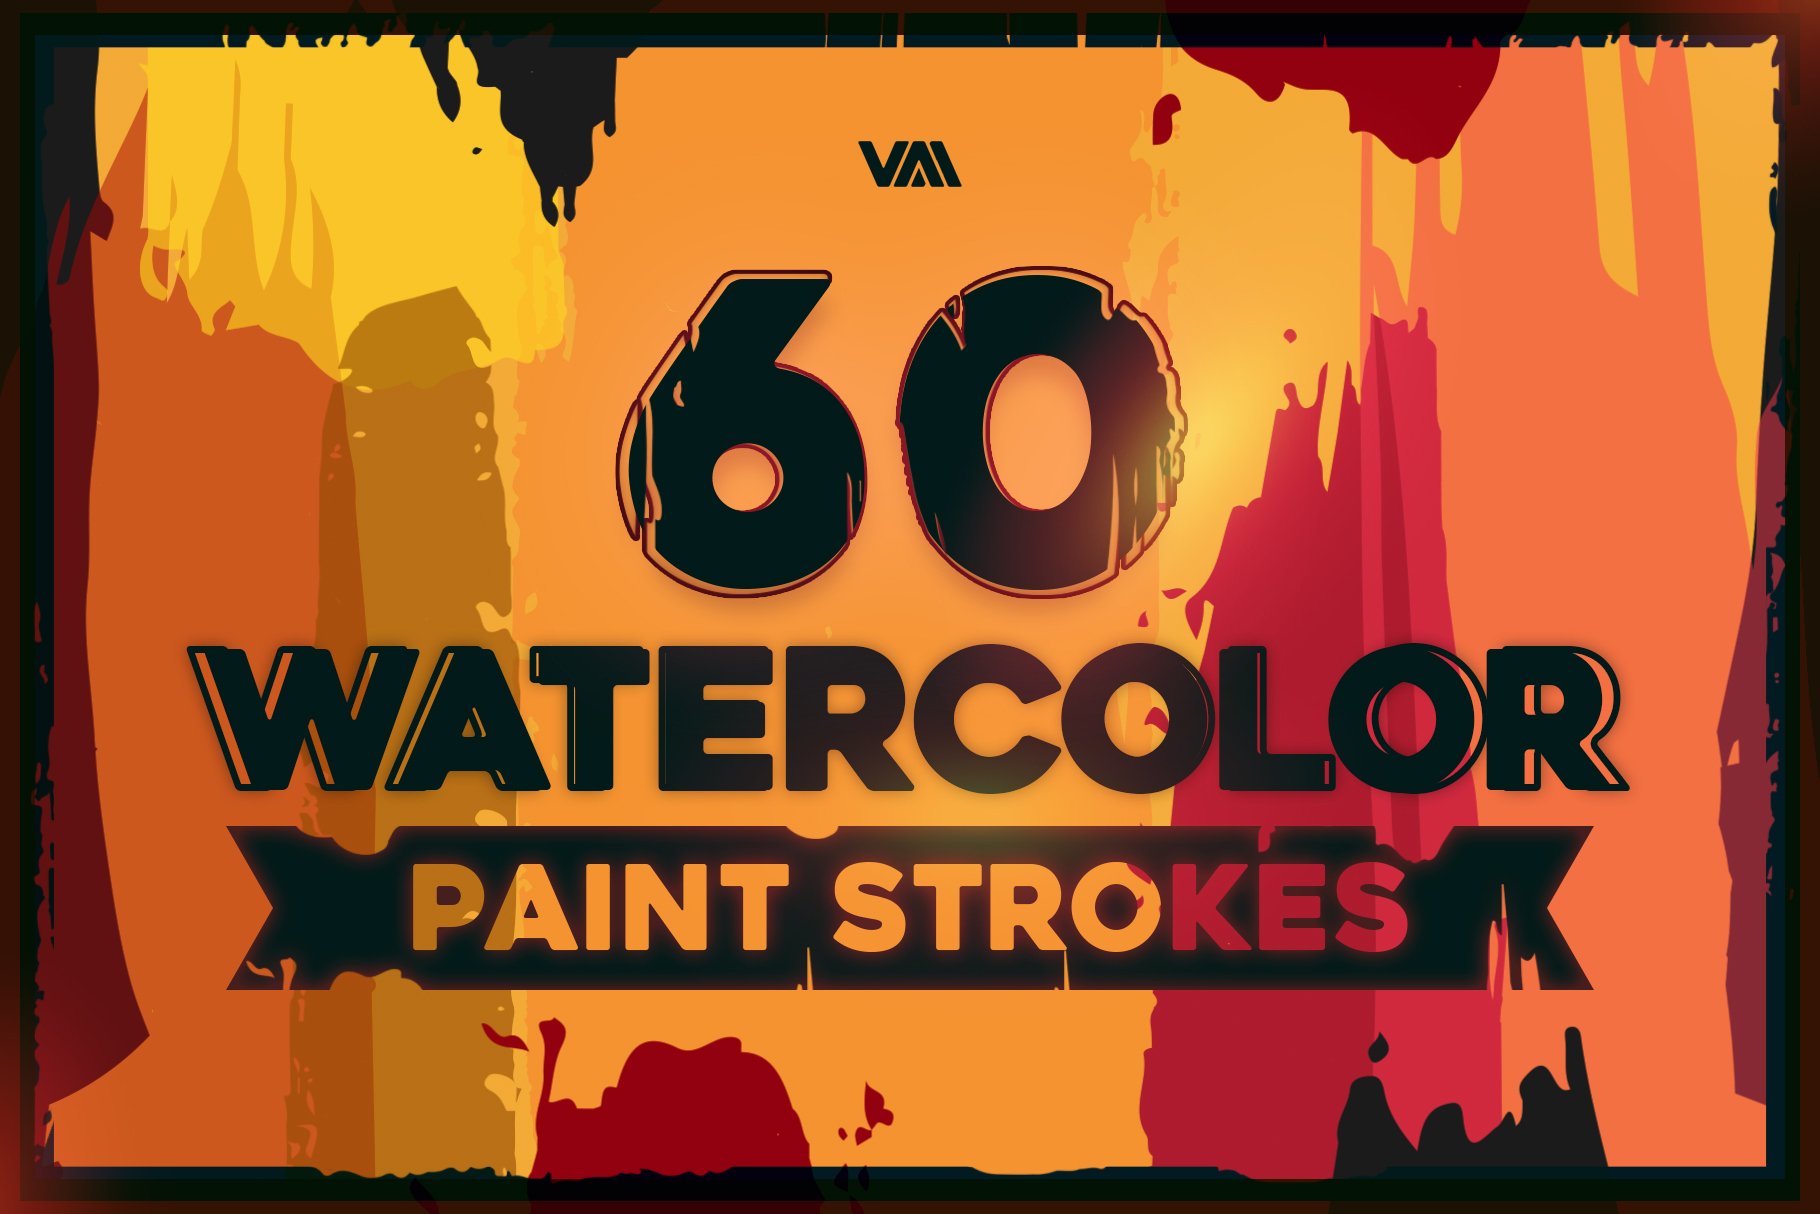 60 Watercolor Paint Strokes Brushescover image.